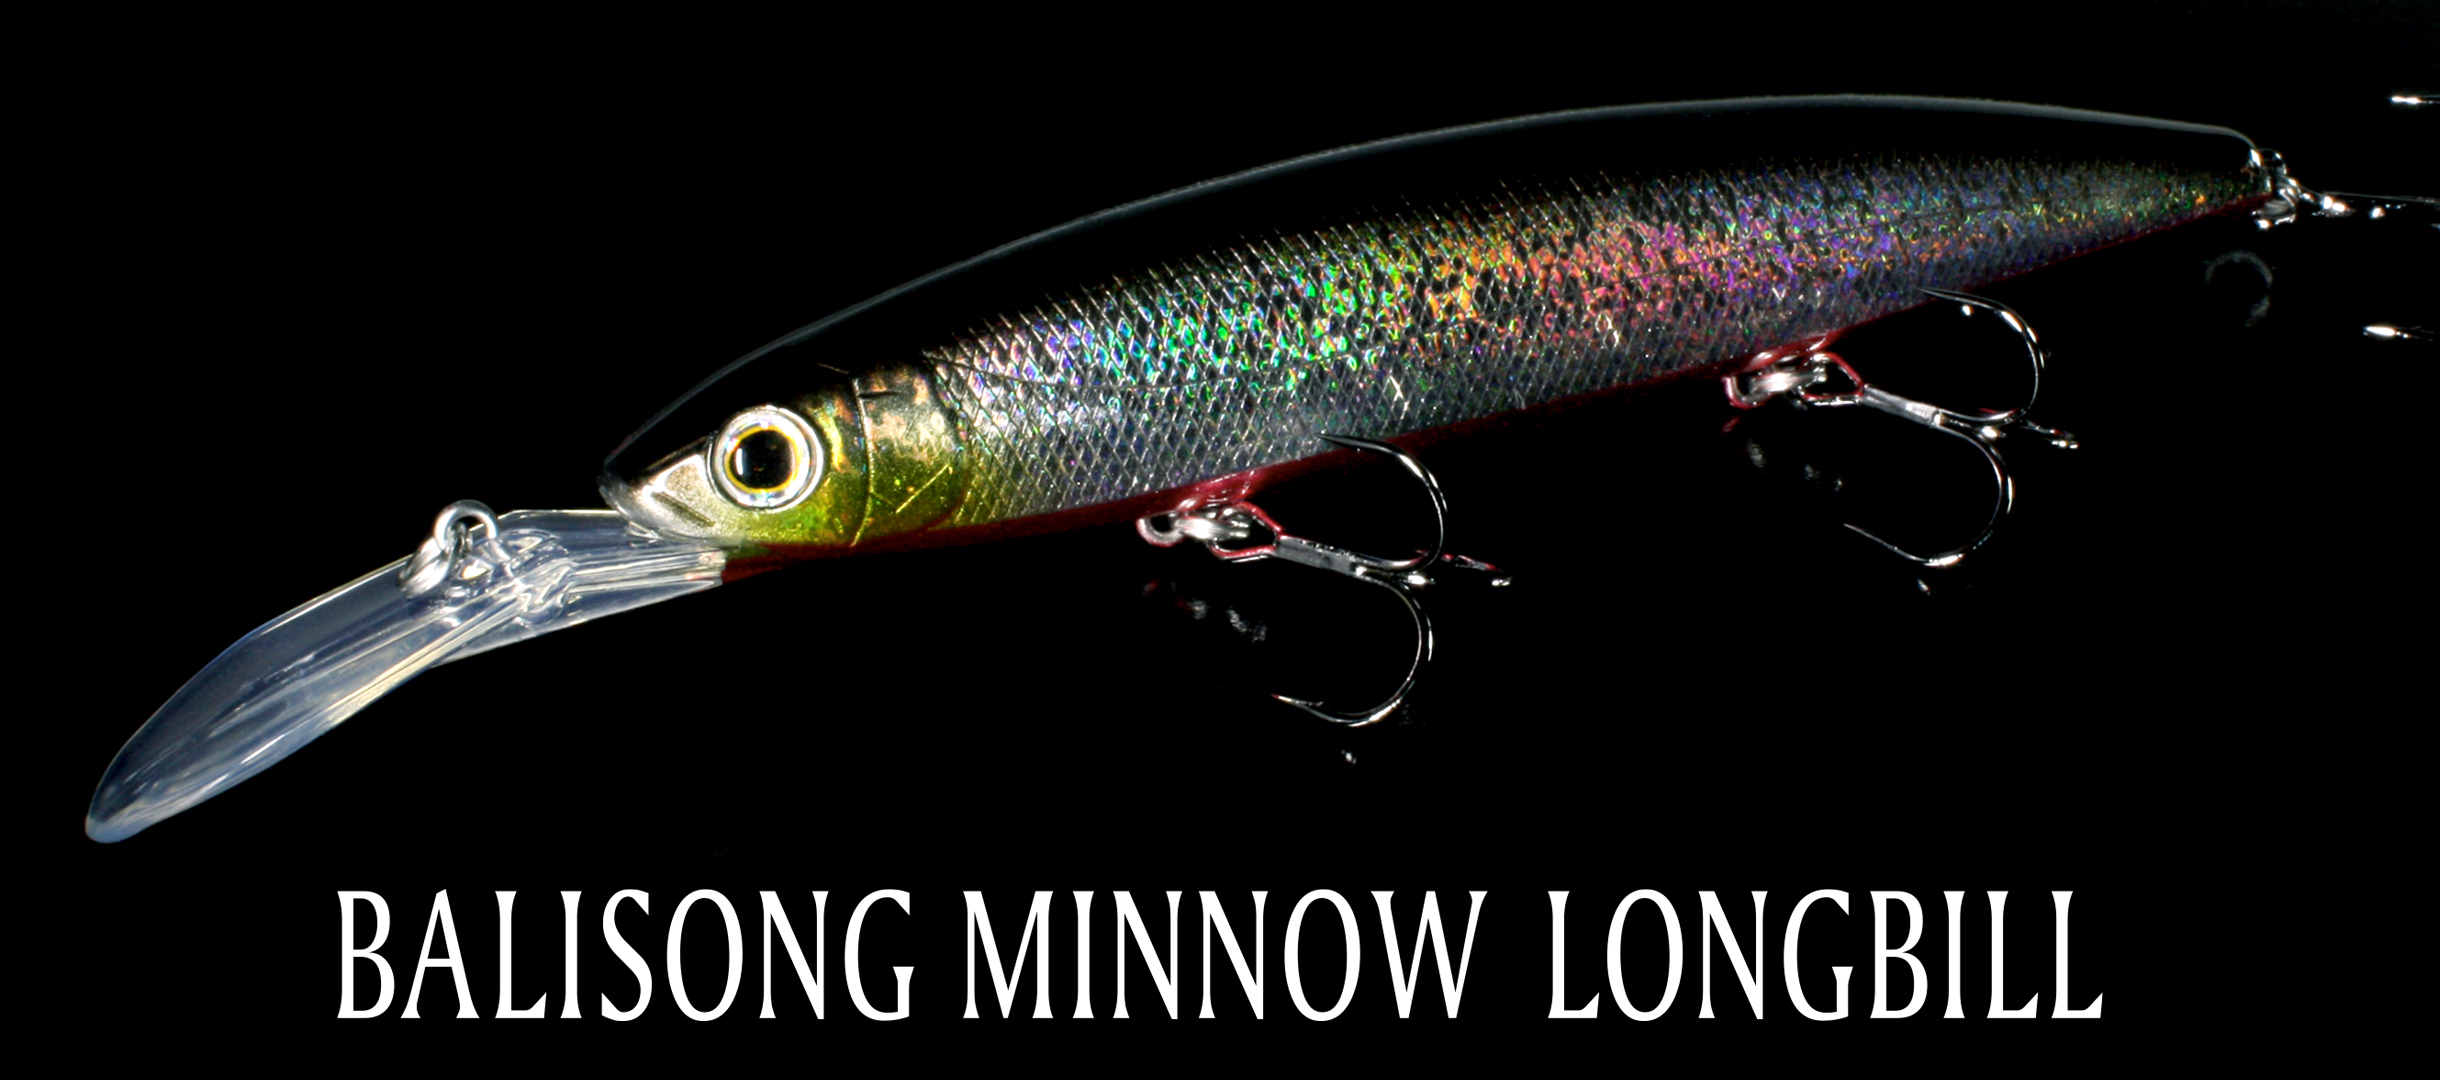 Balisong Minnow Longbill Deps Official Hp デプス 公式hp